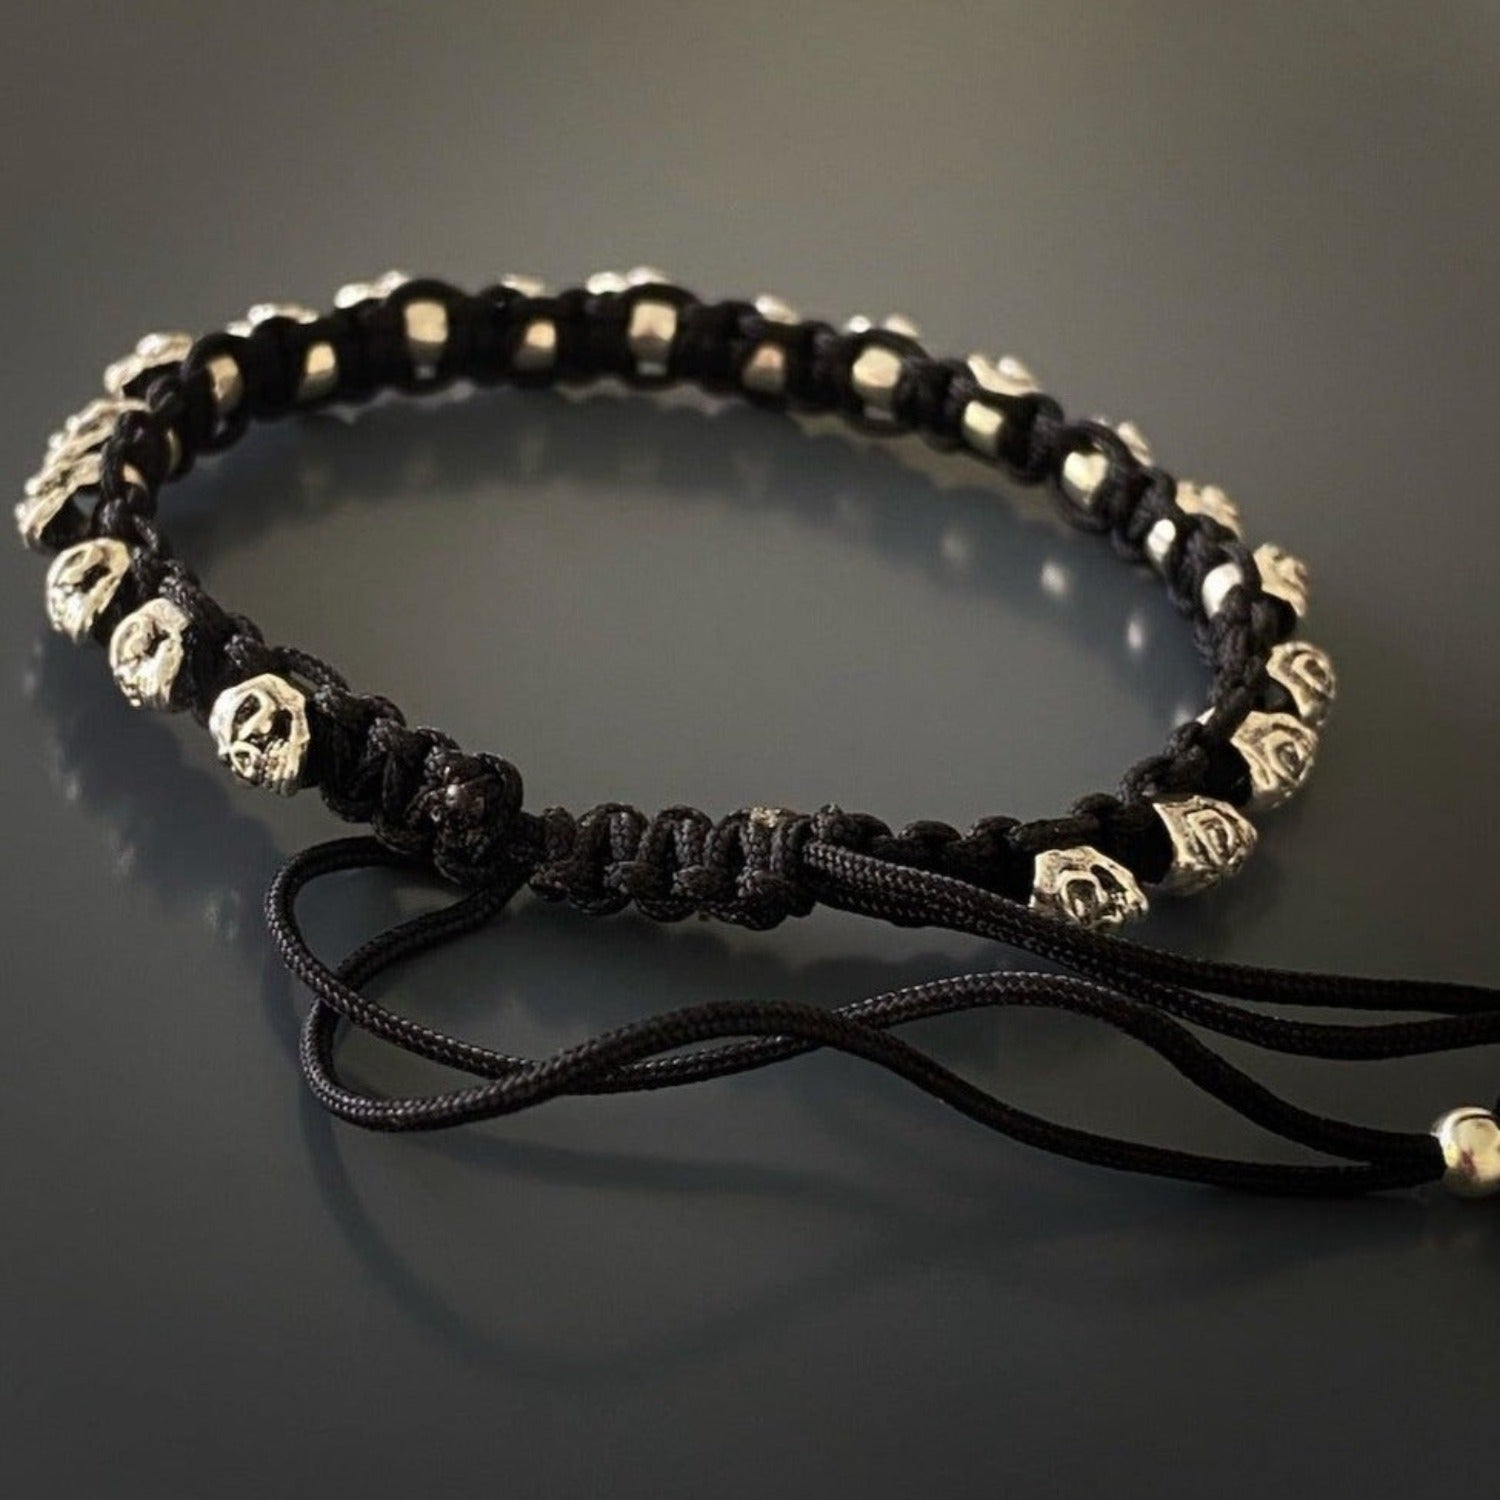 The black knotted rope adds a touch of edginess to the design.